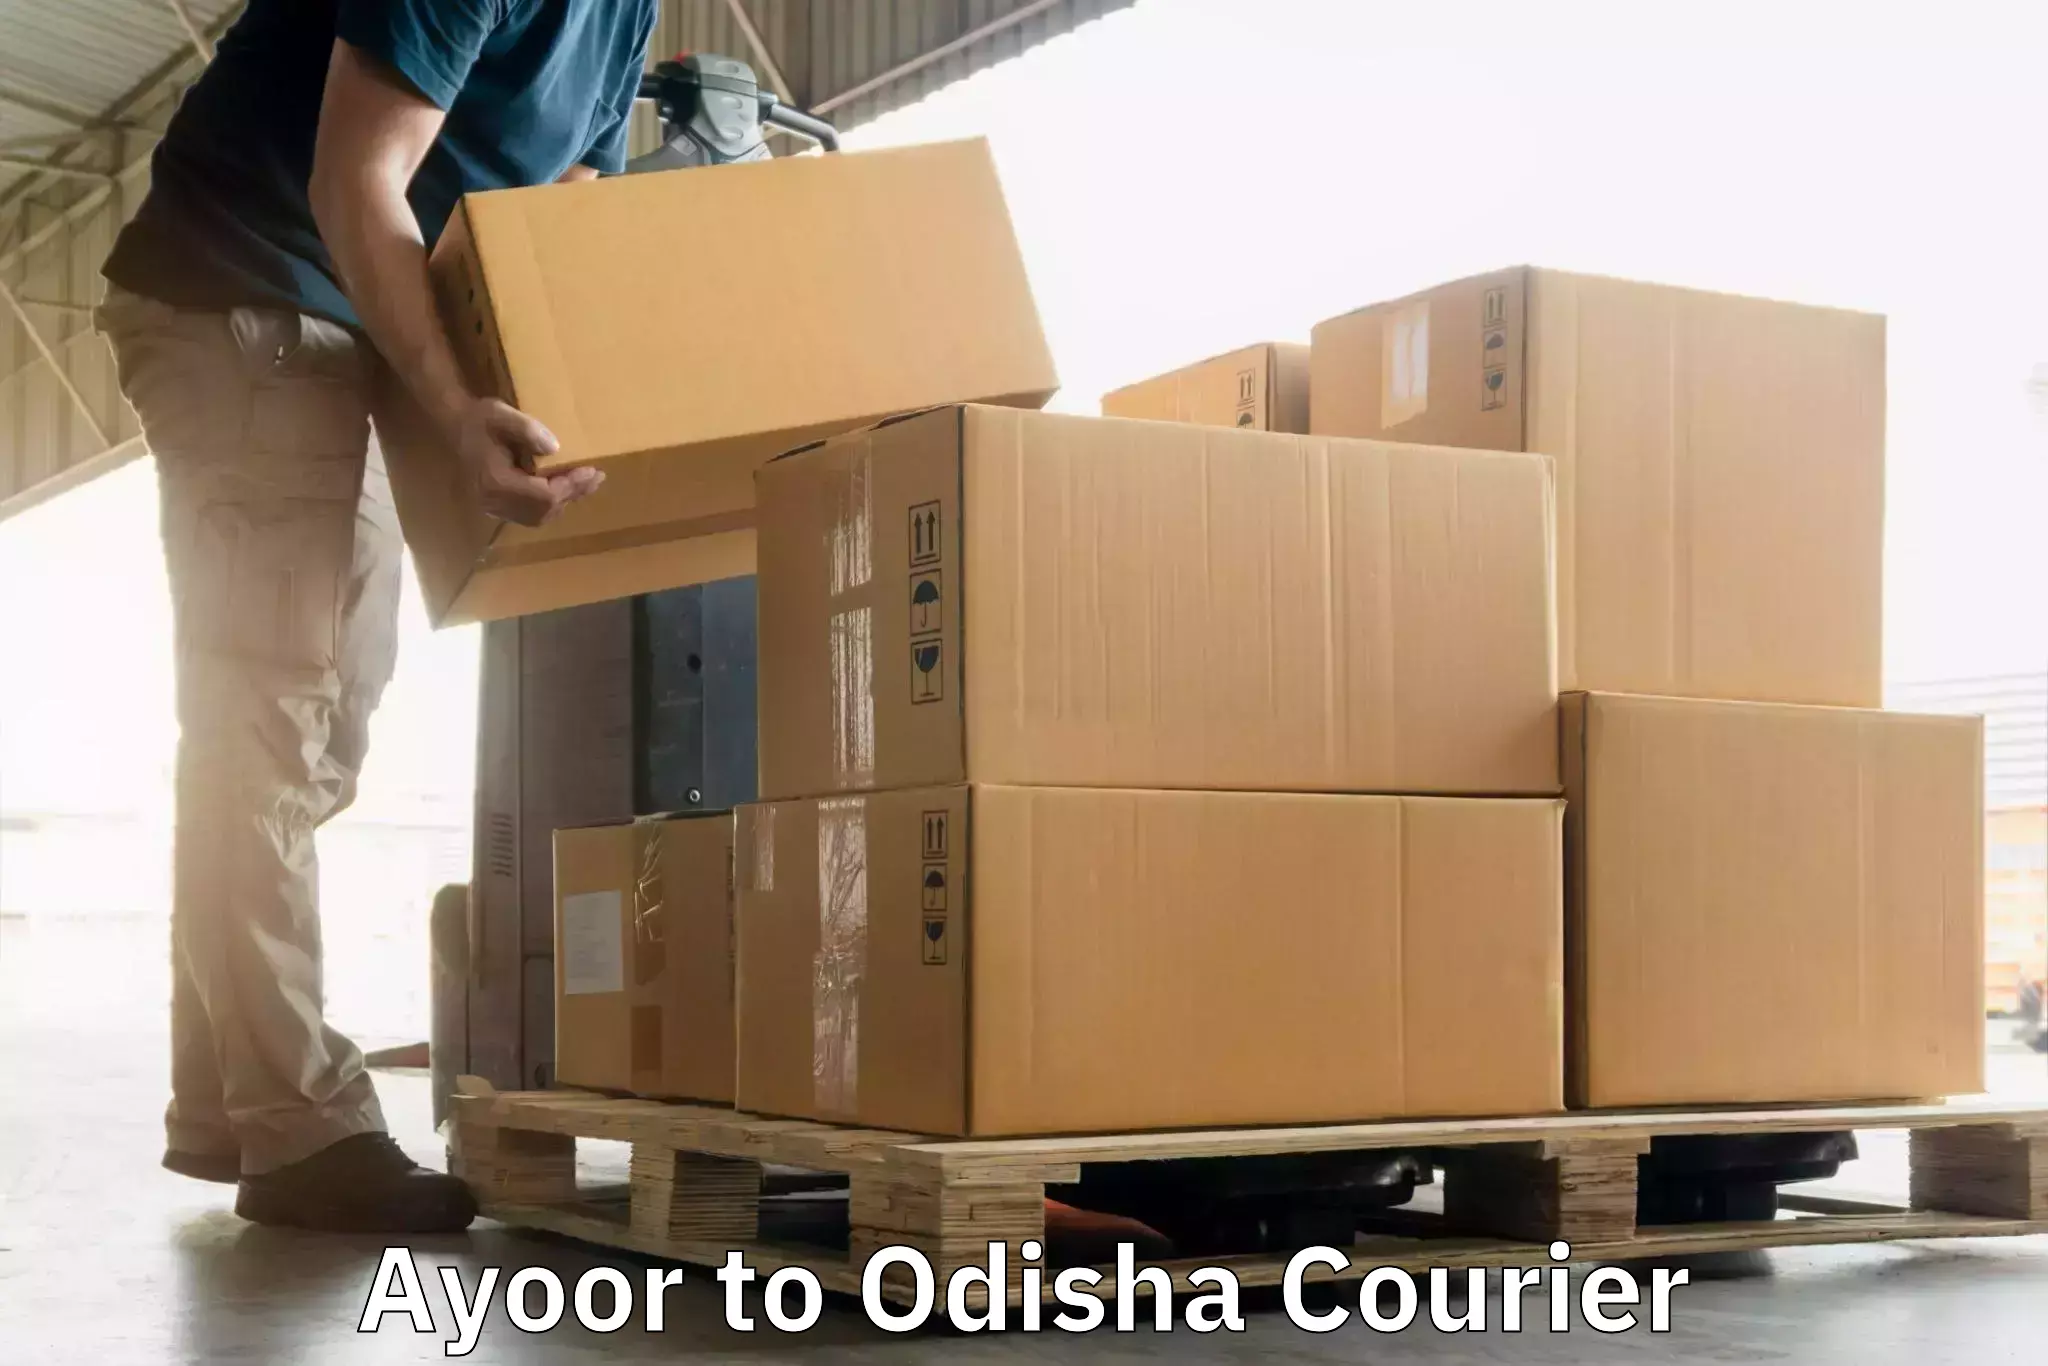 International courier networks Ayoor to Odisha